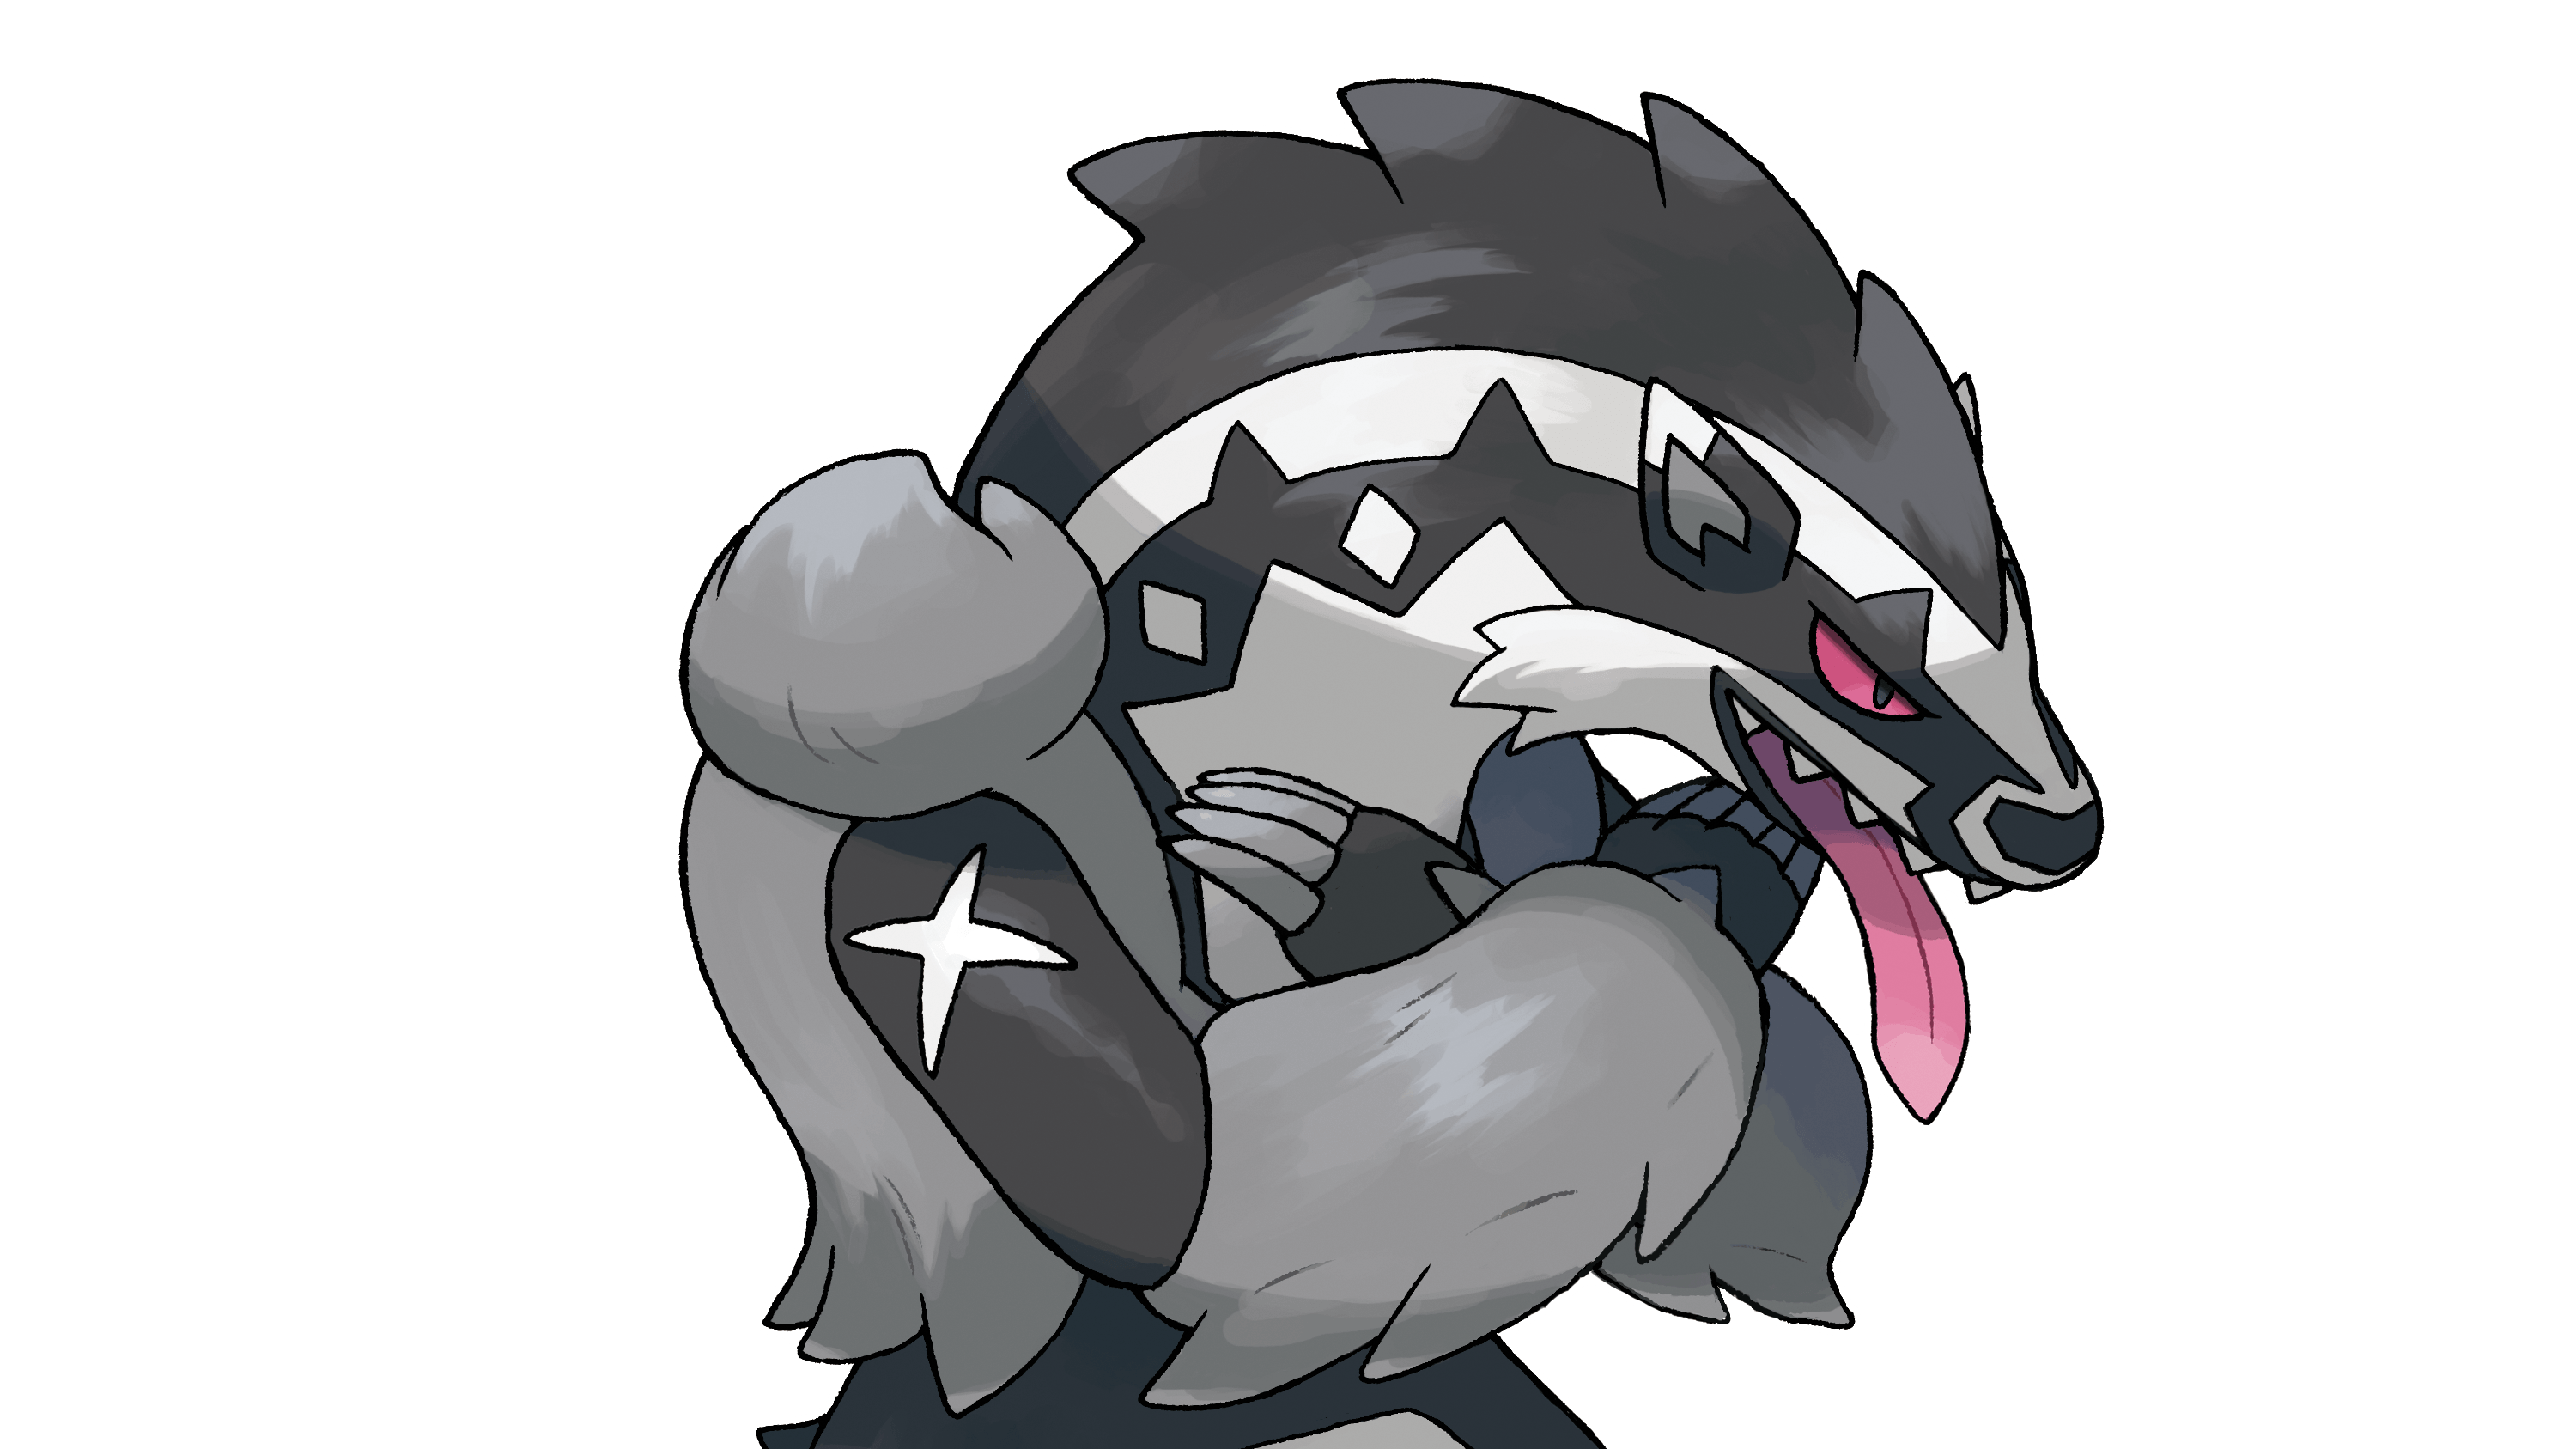 Linoone's Galar evolution Obstagoon is basically a member